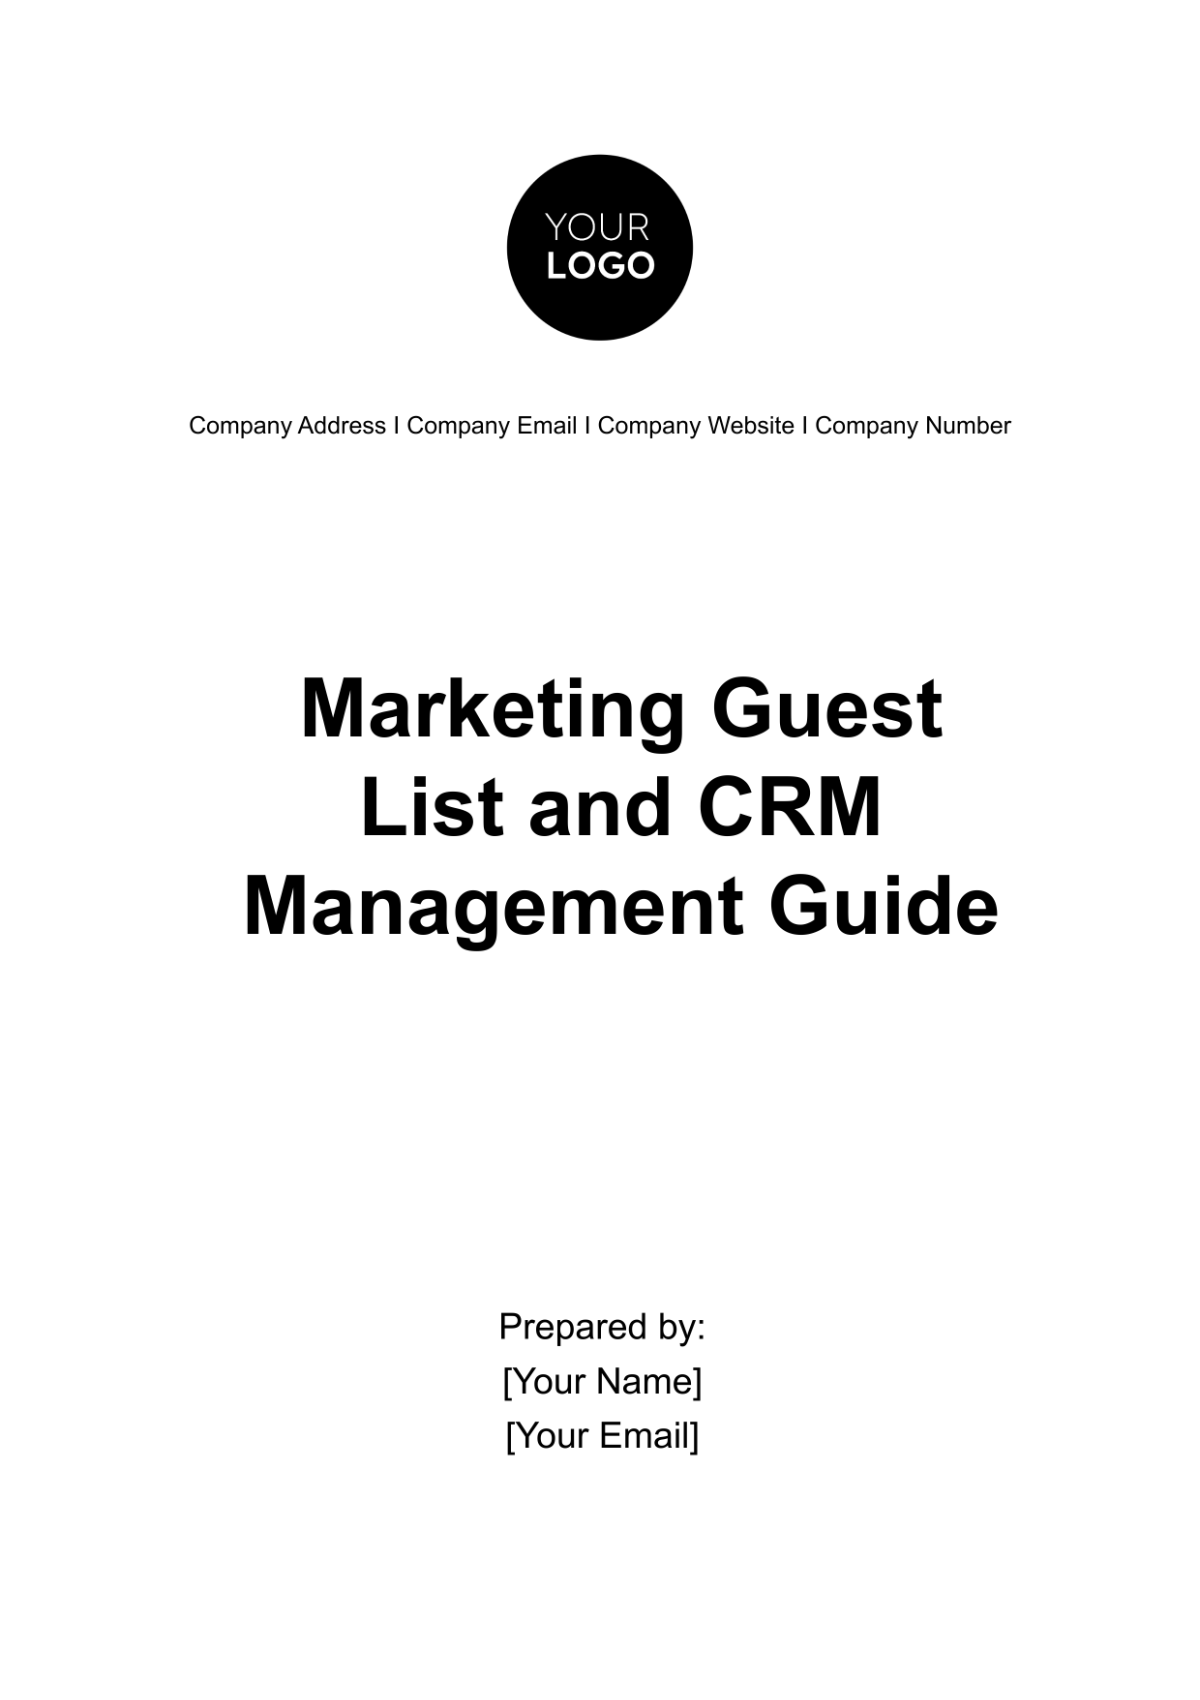 Free Marketing Guest List and CRM Management Guide Template